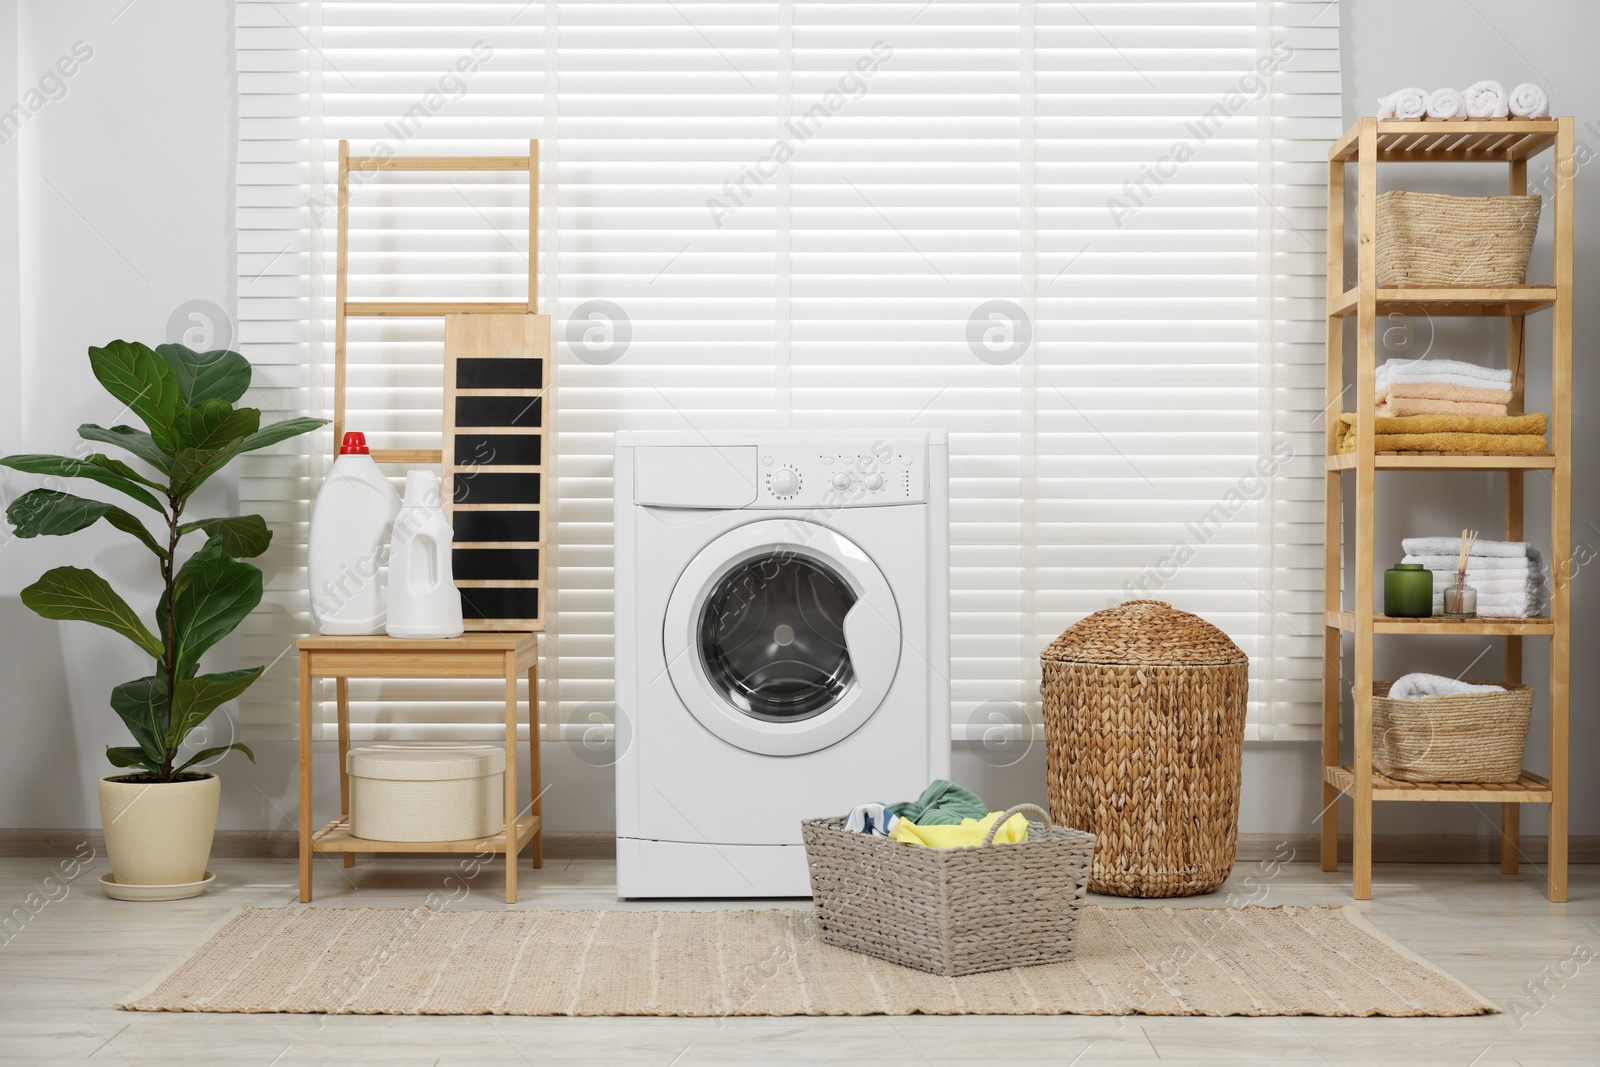 Photo of Laundry room interior with washing machine, baskets and houseplant